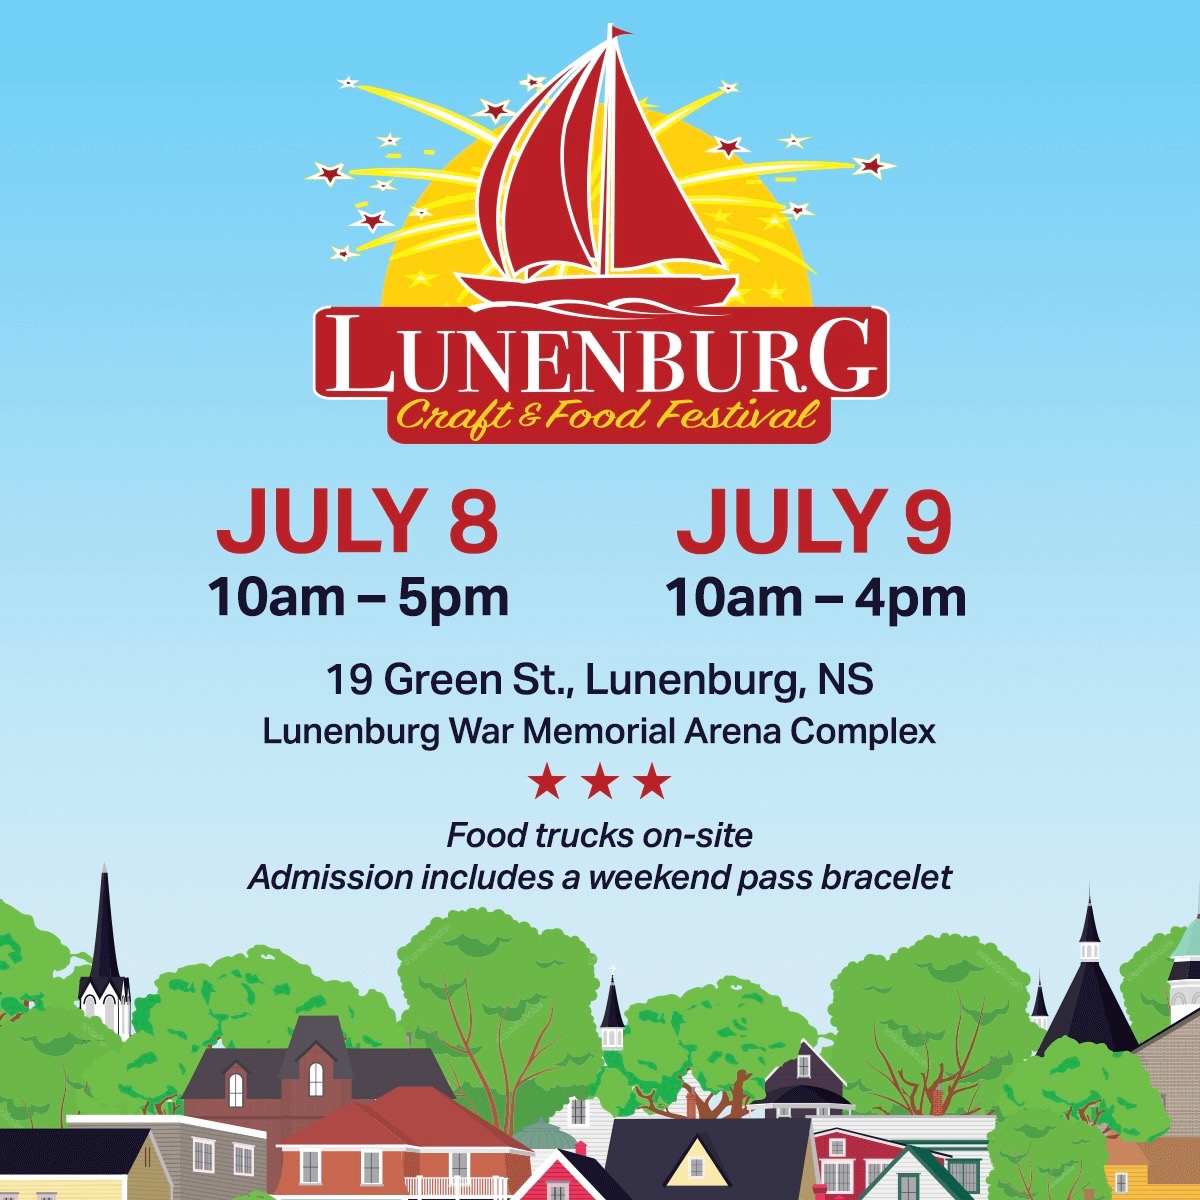 It's day two of the Lunenburg Craft & Food Festival and the last chance to pick up a bag of Saltwinds Coffee! Don't miss out!☕🤩

 #LocalCoffee #FreshlyRoasted #novascotia #novascotialife #novascotiastrong #novascotiatourism #novascotiaeats #novascoticabeaches